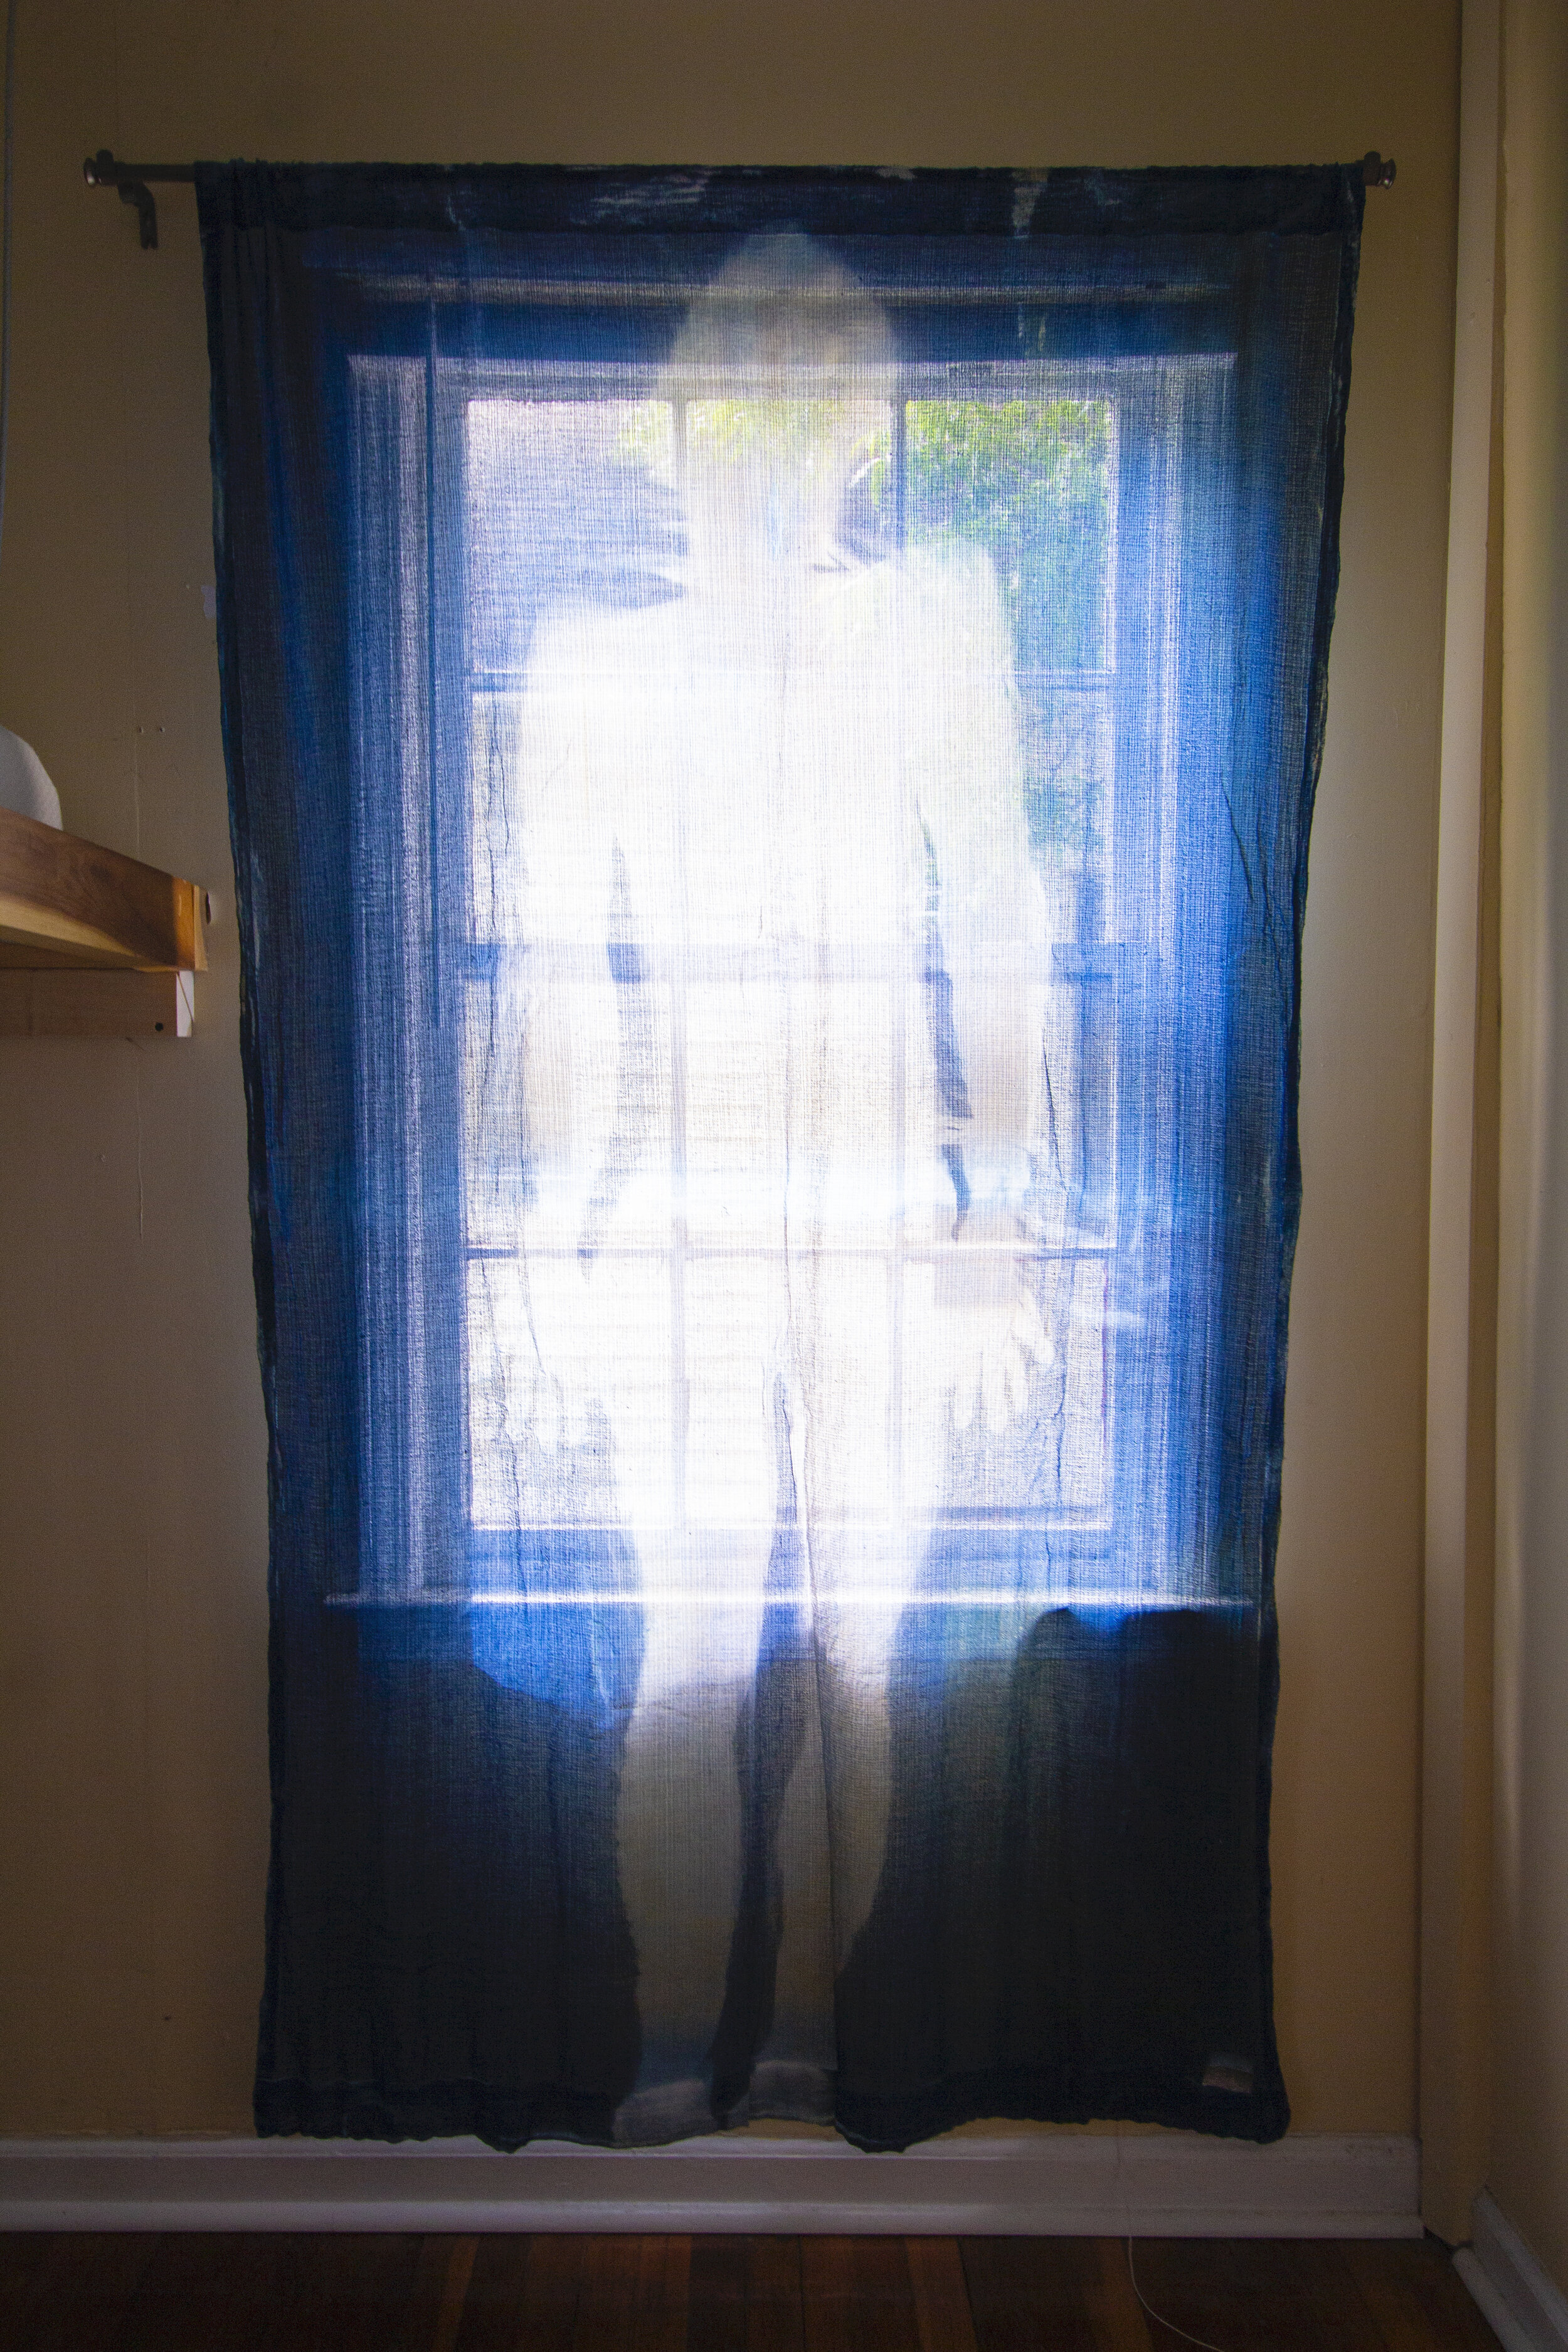 Stasis [midday], 2020, cotton curtain, cyanotype solution, curtain rod, and hardware, 55 x 84 inches